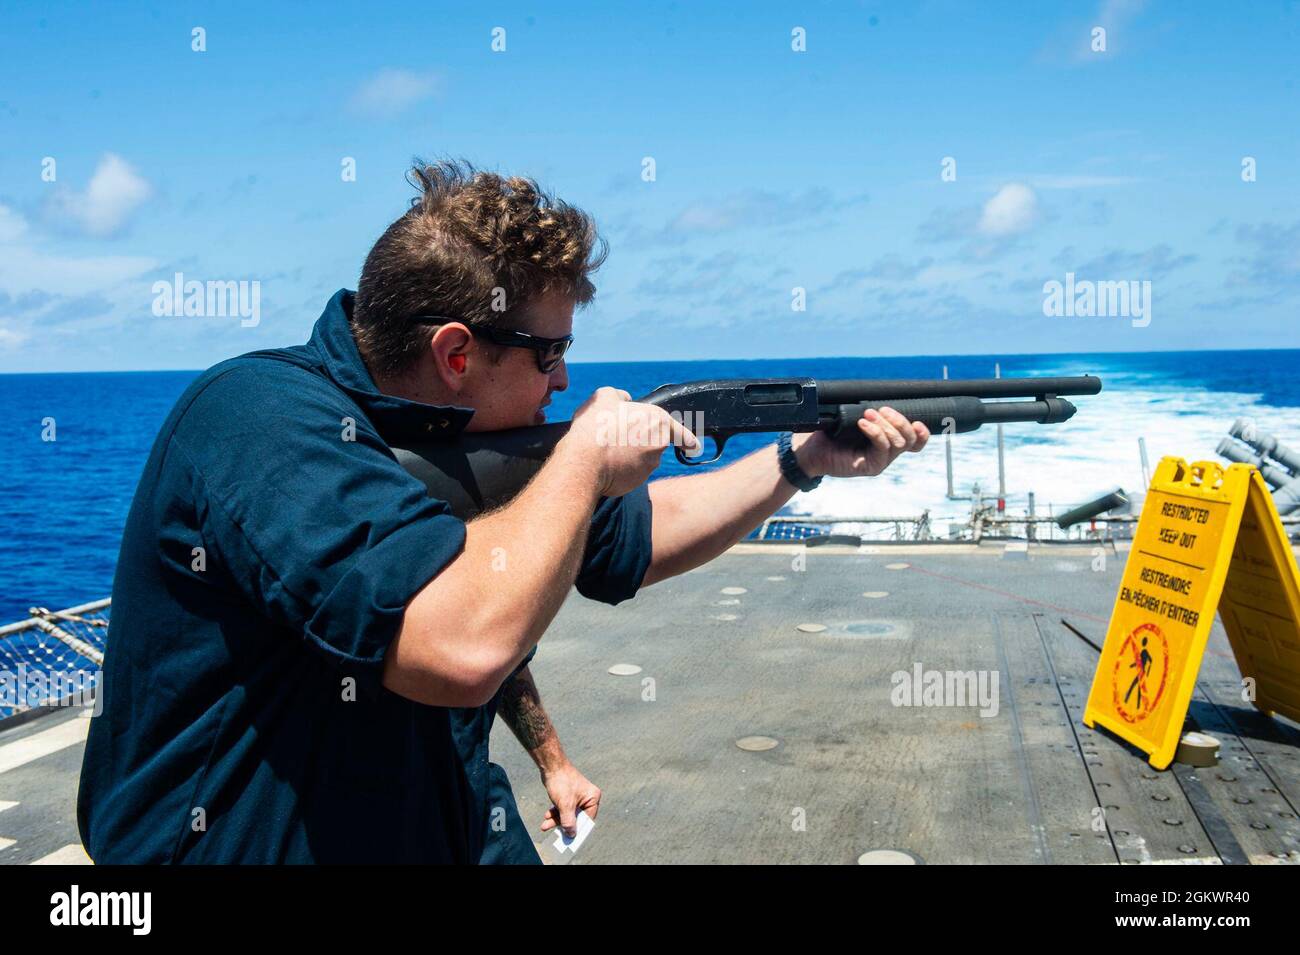 210712-N-RG587-1489 ATLANTIC OCEAN (July 12, 2021) Information Systems Technician 2nd Class Derrick Smith, fires an M500 shotgun aboard the Ticonderoga-class guided-missile cruiser USS Vella Gulf (CG 72), during a small arms qualification course in the Atlantic Ocean, July 12. Vella Gulf is underway in the Atlantic Ocean conducting operations as part of the Dwight D. Eisenhower Carrier Strike Group. Stock Photo